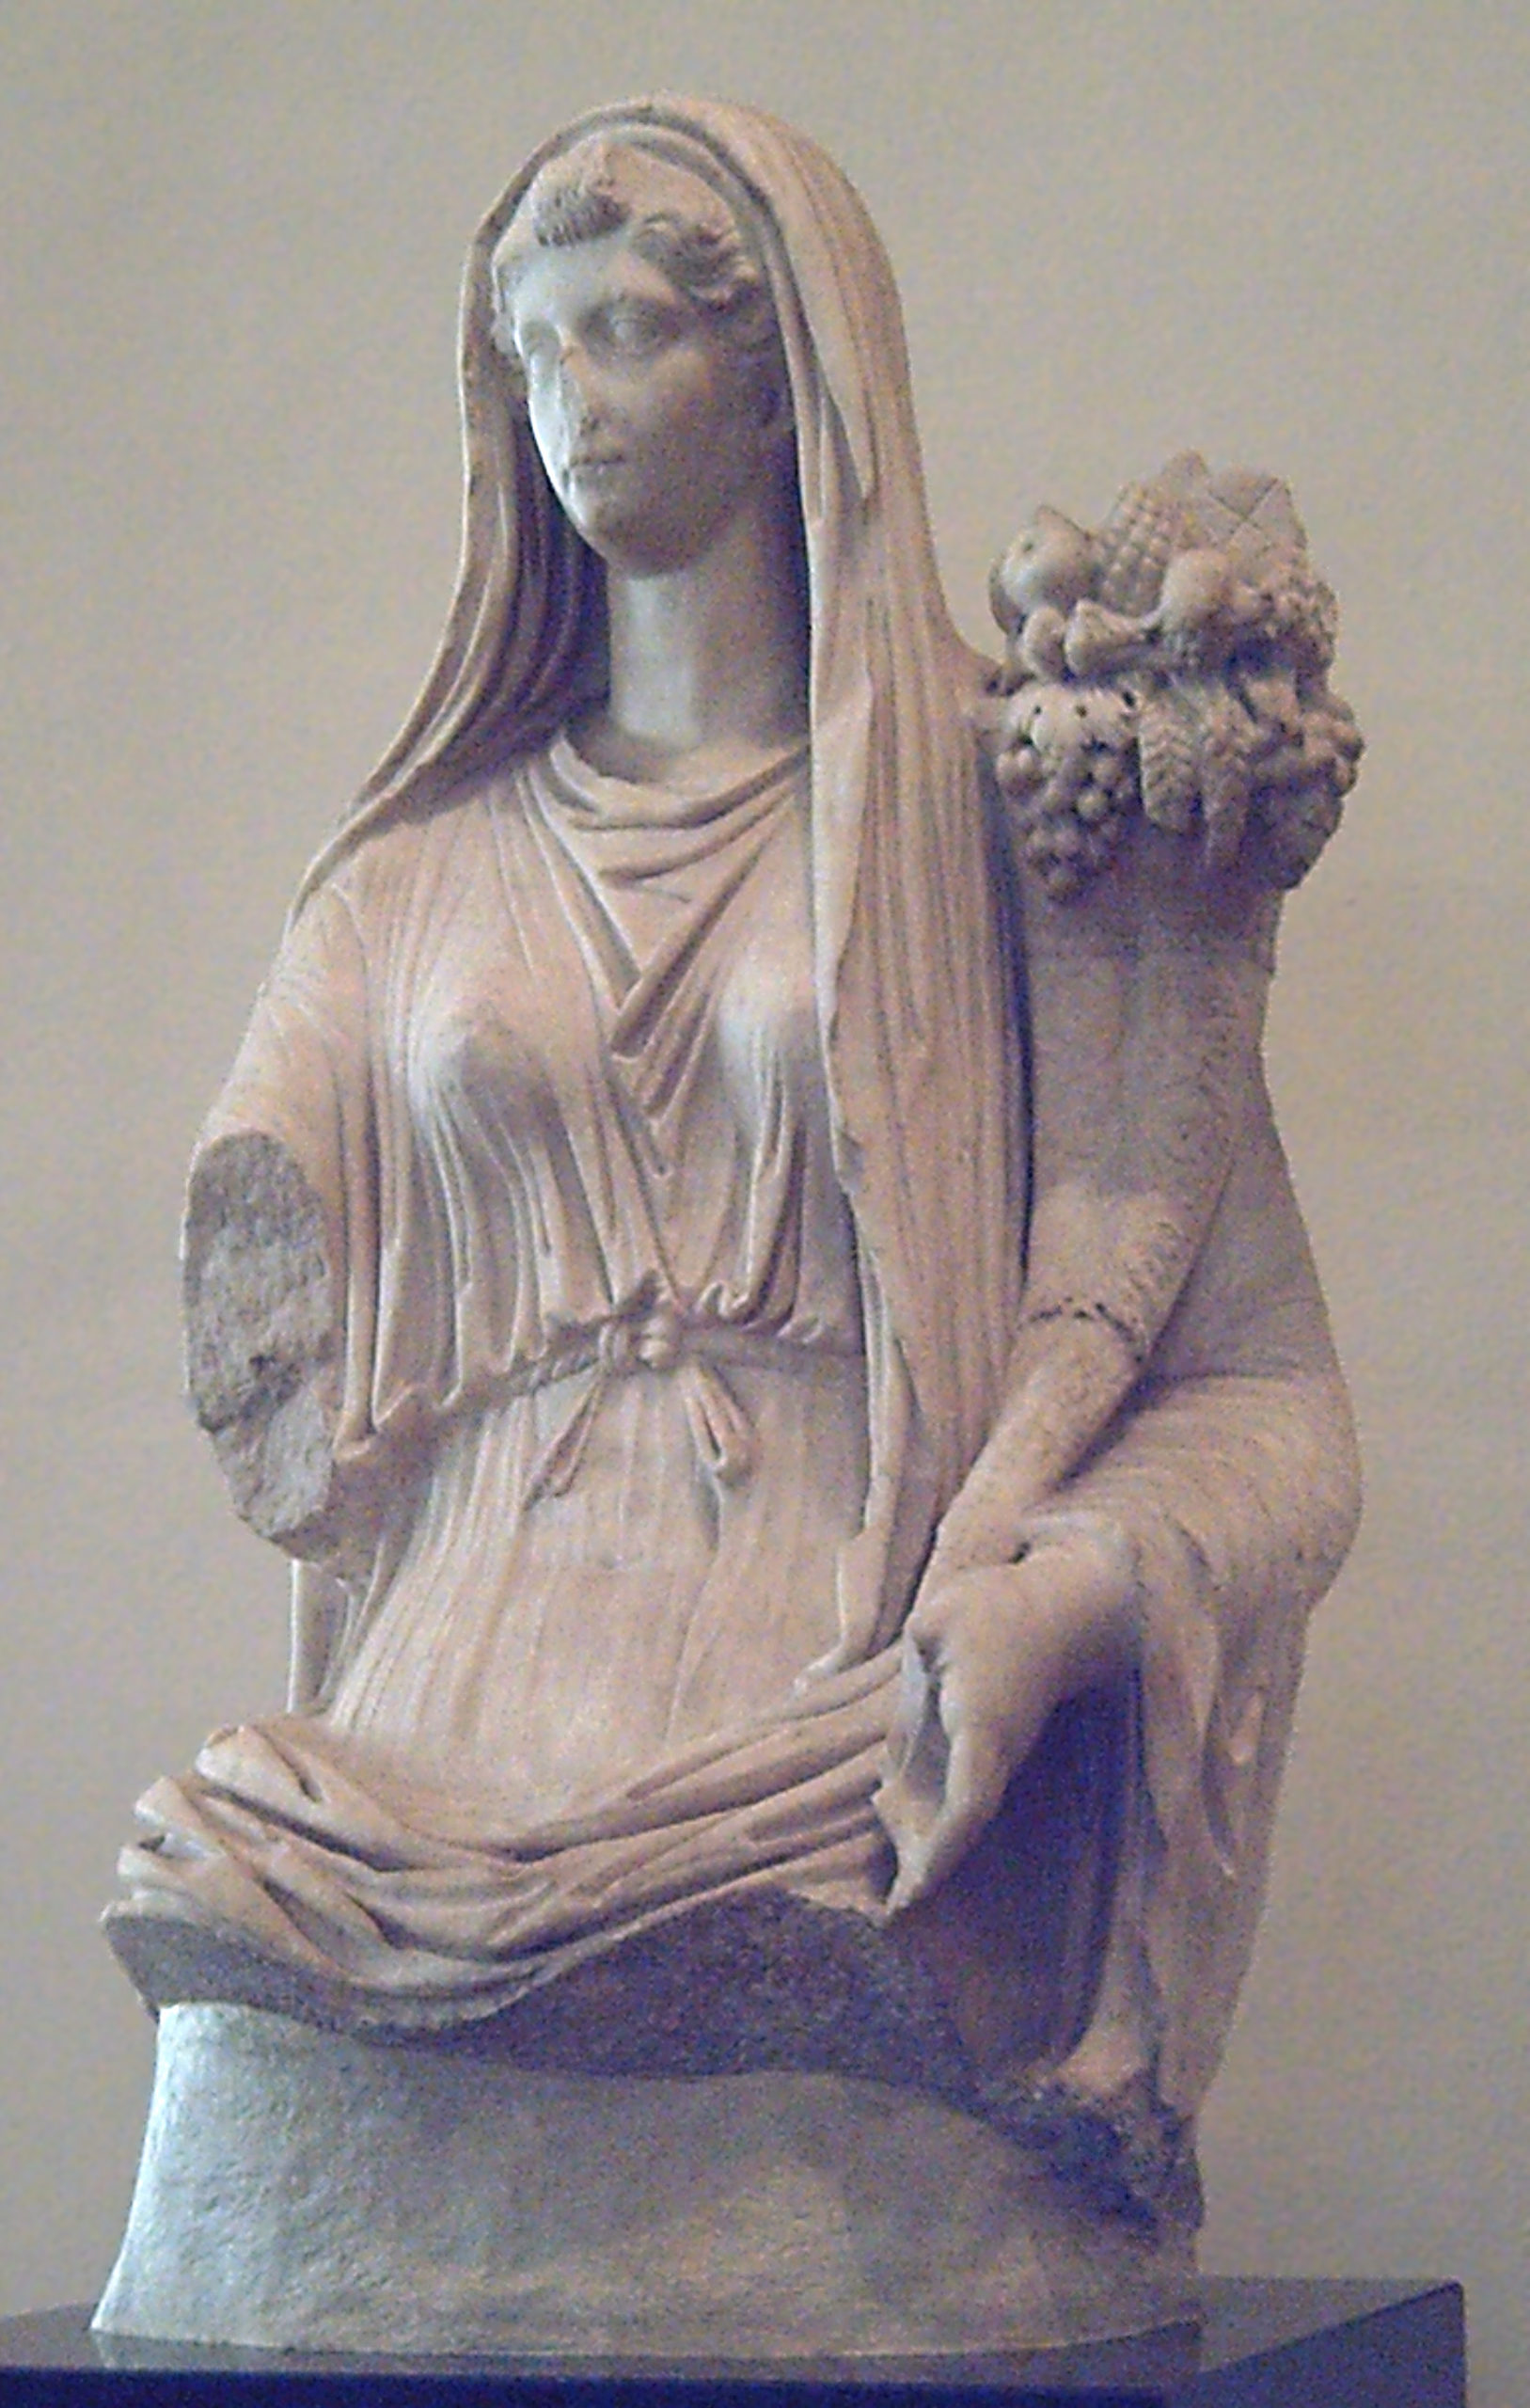 Head and torso of Livia Drusilla. She is veiled and robed, and holding a cornucopia.